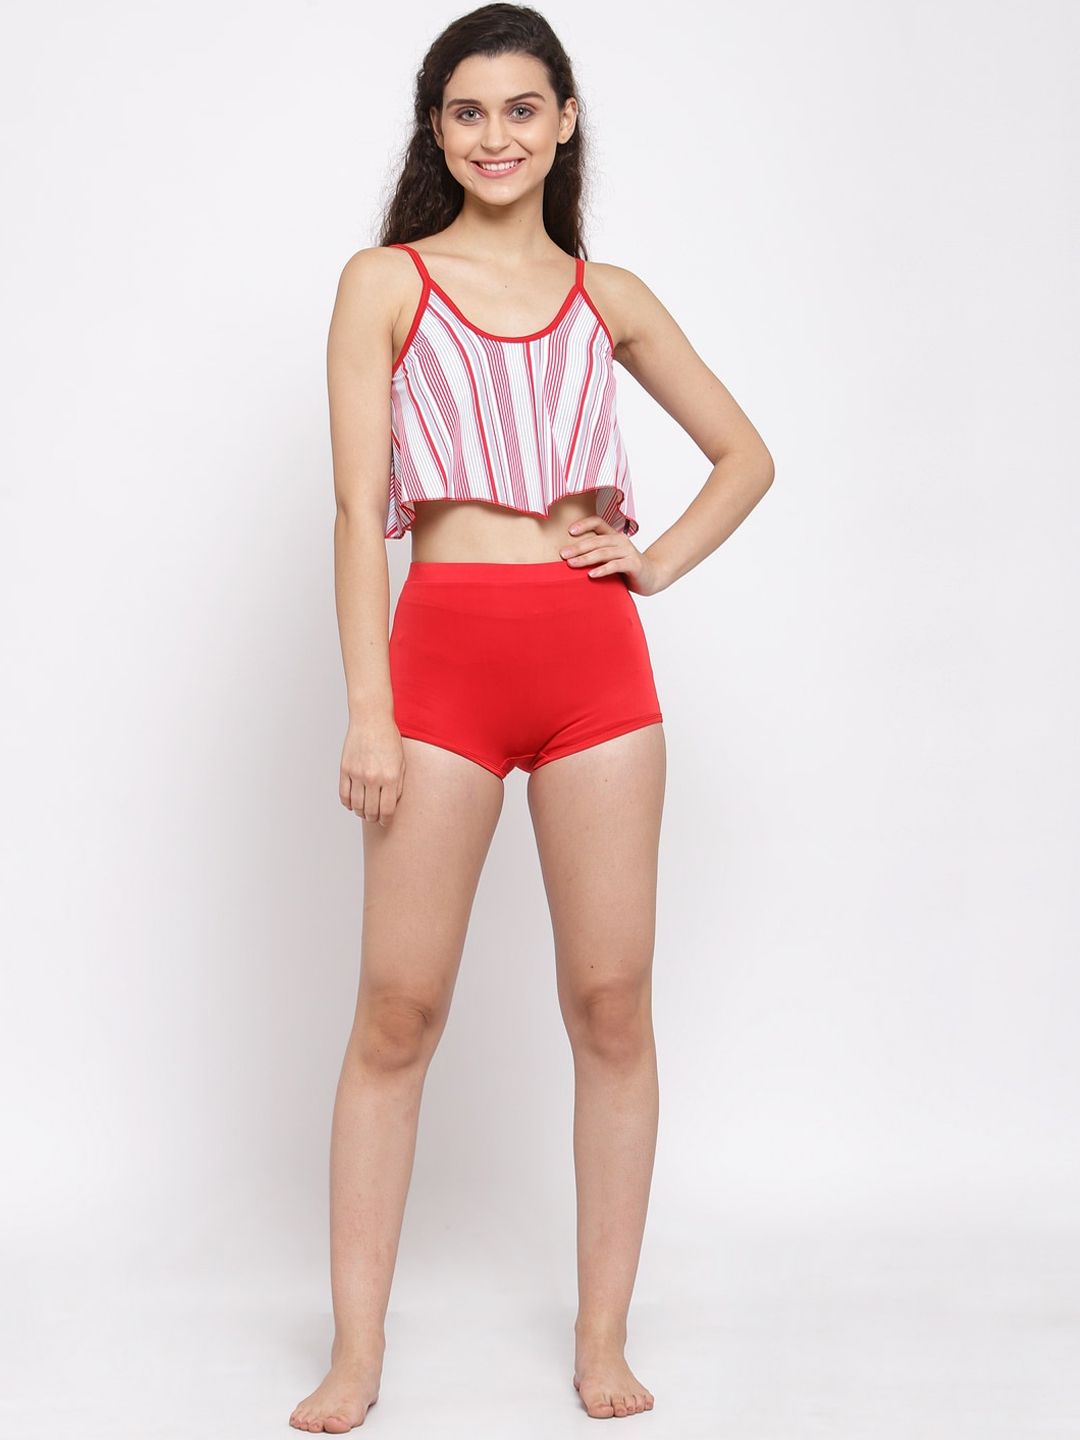 CUKOO Women Red & White Striped Padded Two-Piece Swim Set Price in India